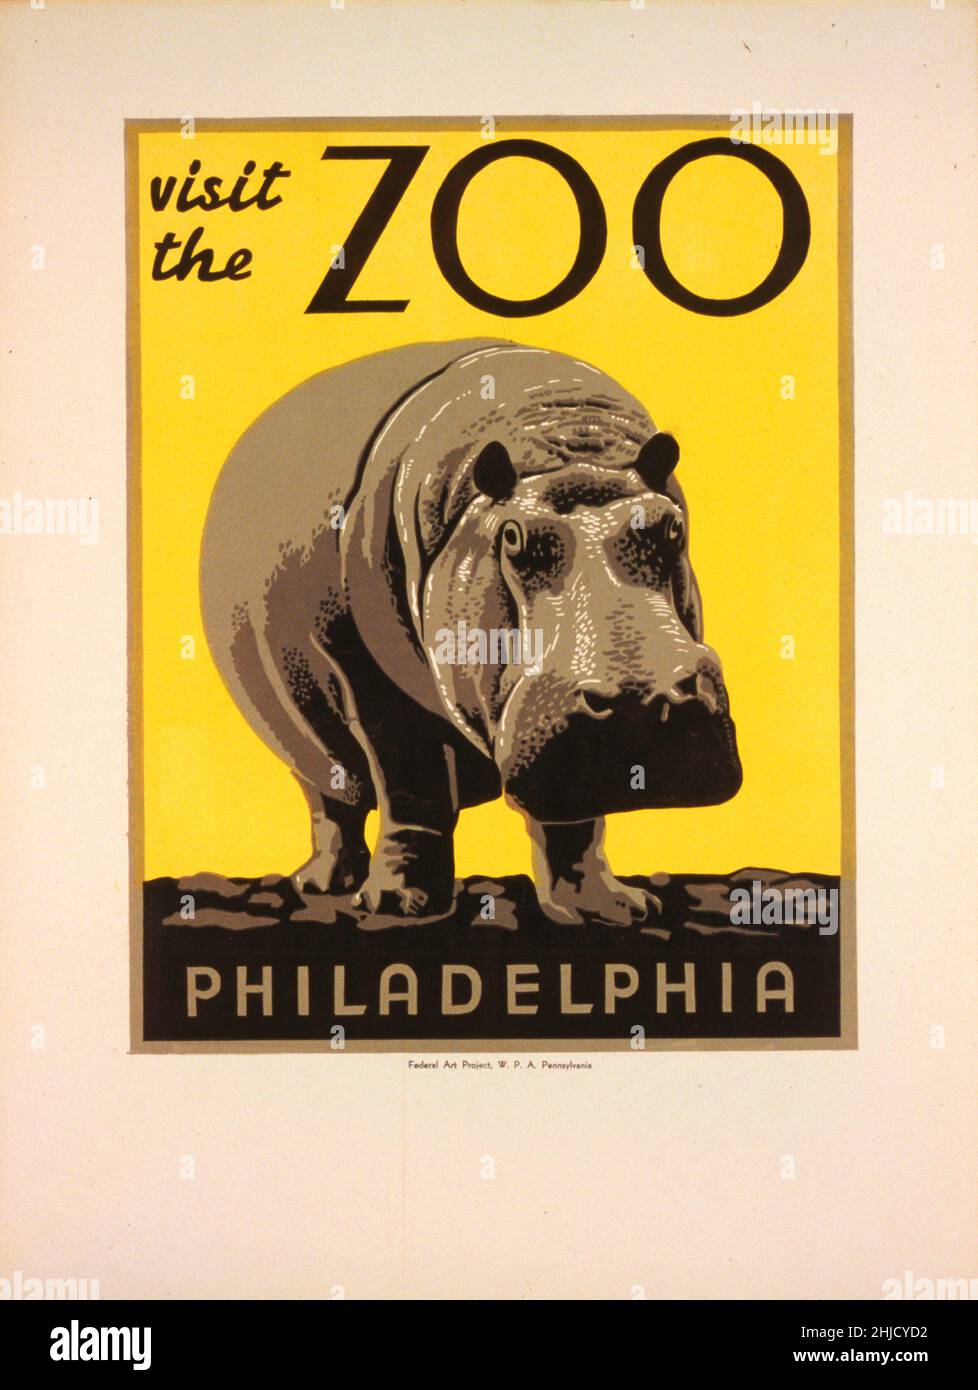 Promotional poster for the Philadelphia Zoo created by the WPA, 1941-1943. Library of Congress. (Richard B. Levine) Stock Photo